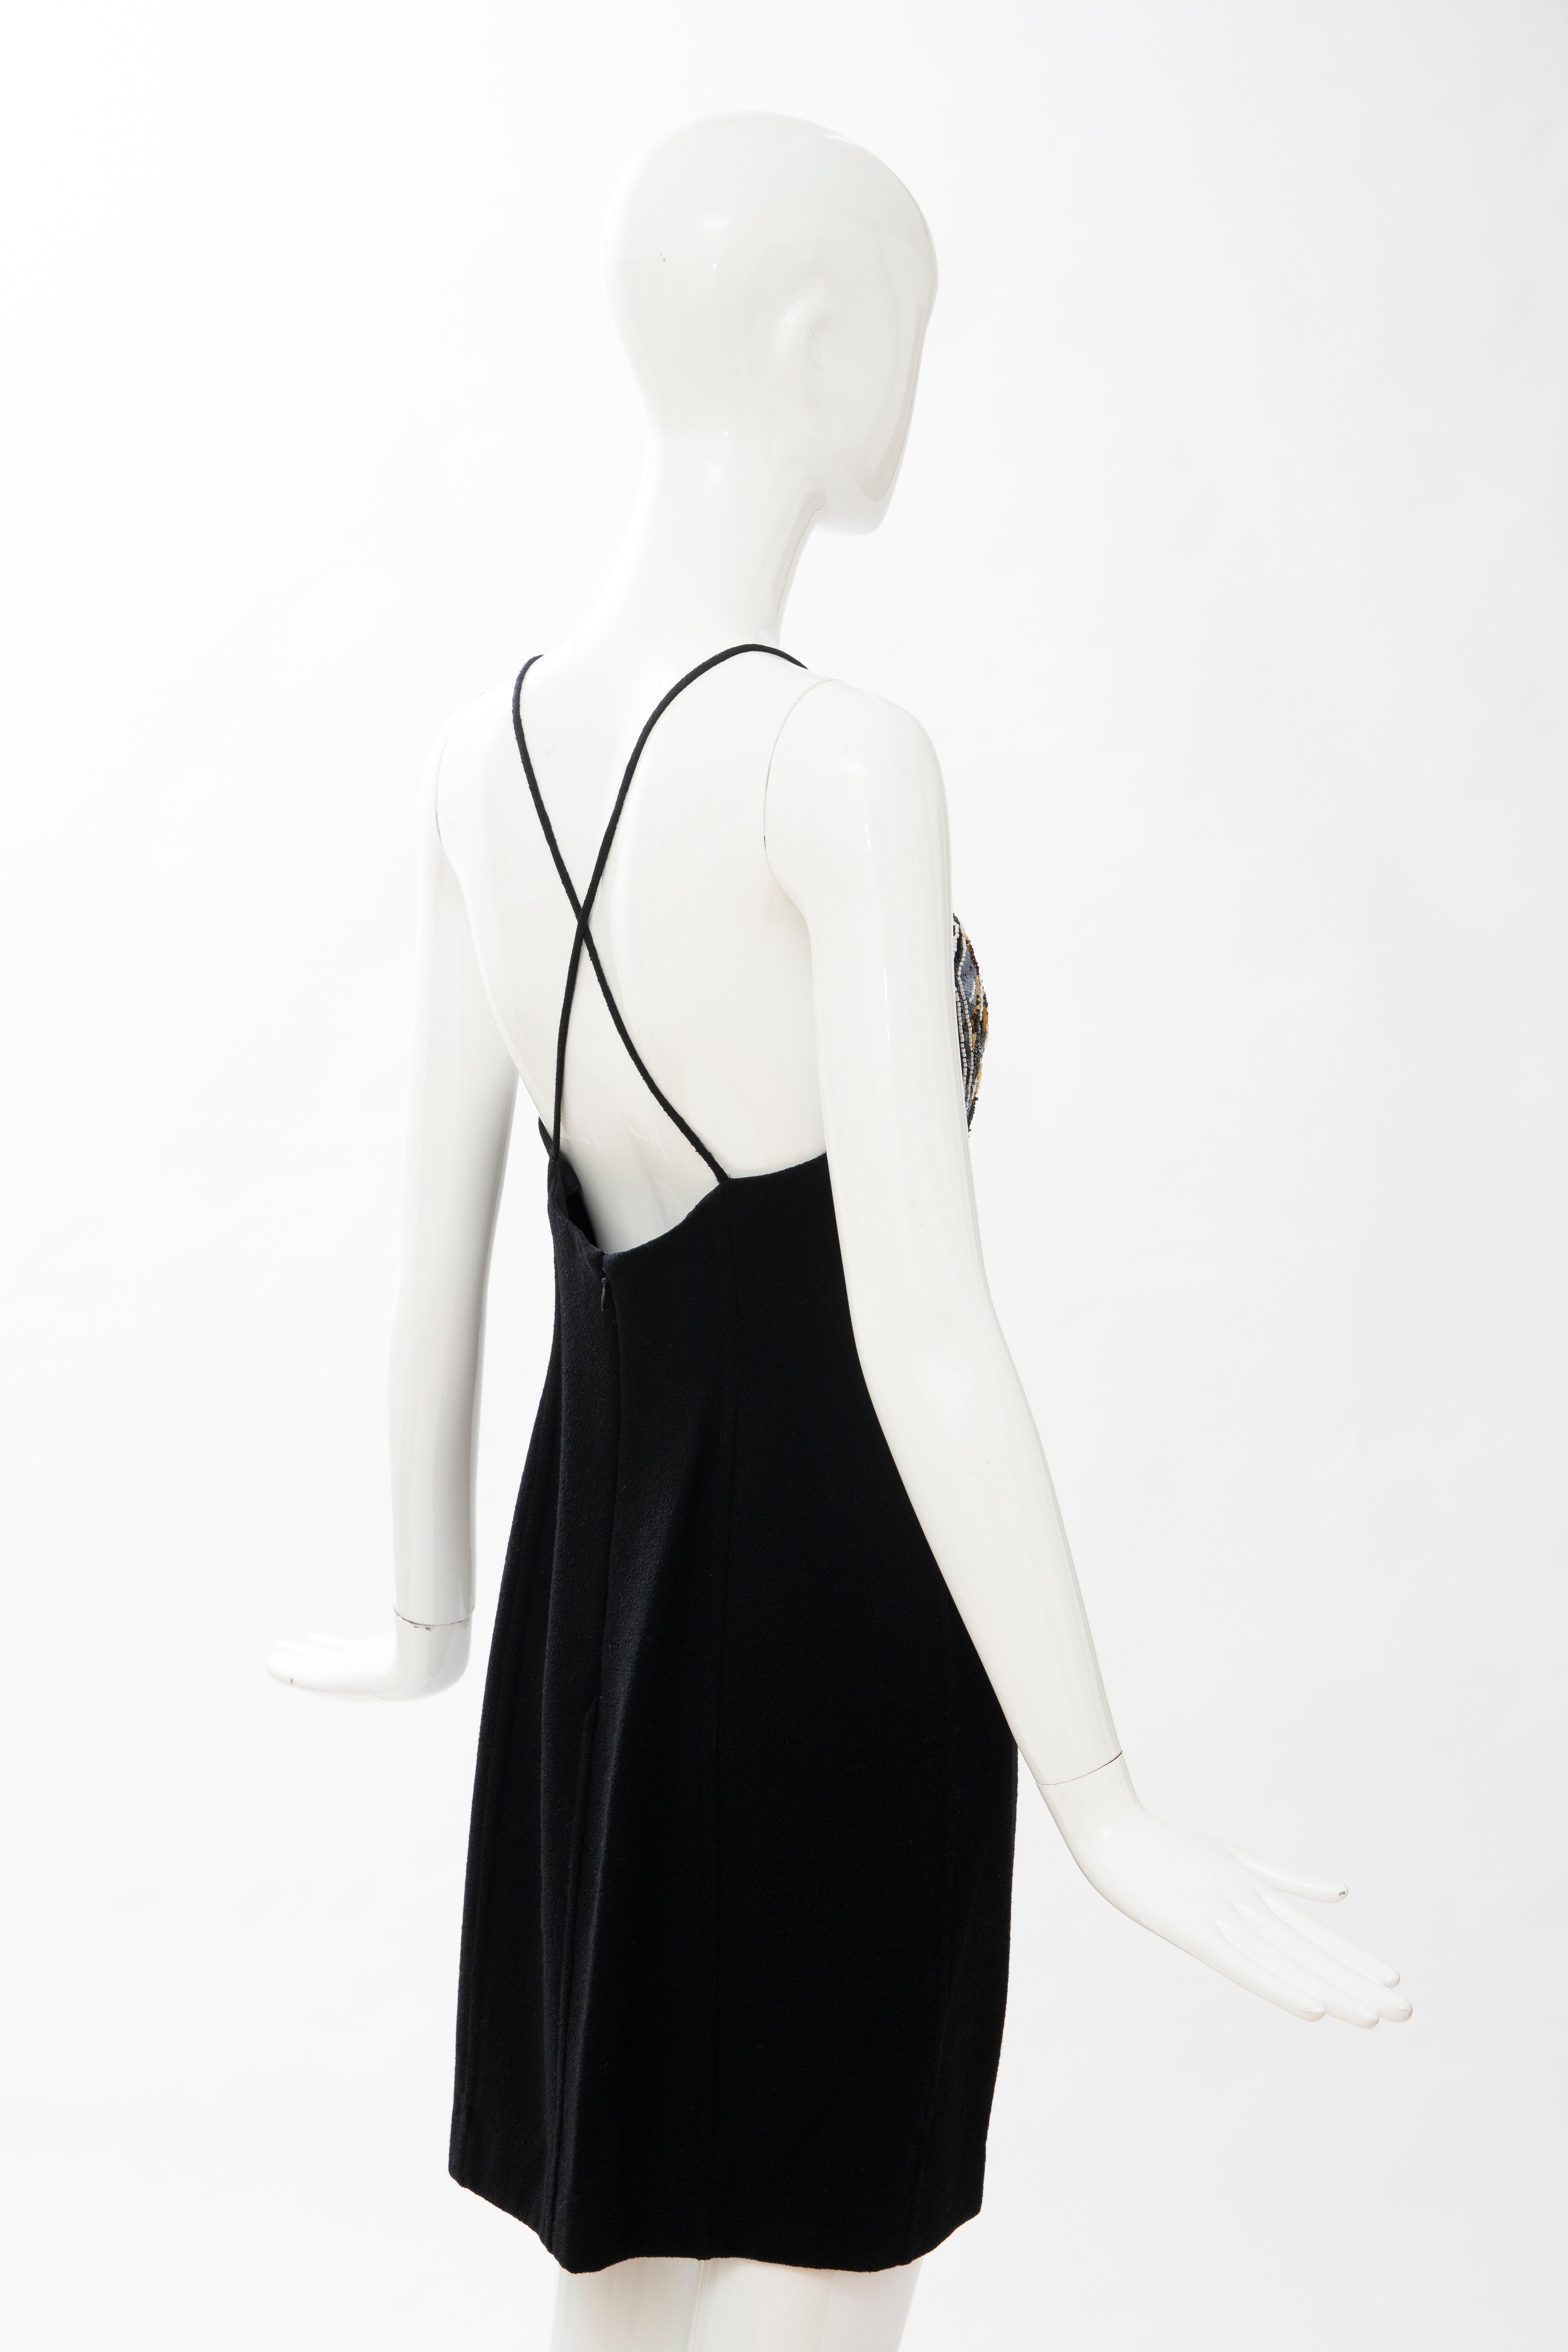 Geoffrey Beene Black Wool Crepe Embroidered Sequins Dress Ensemble, Circa 1990's For Sale 14